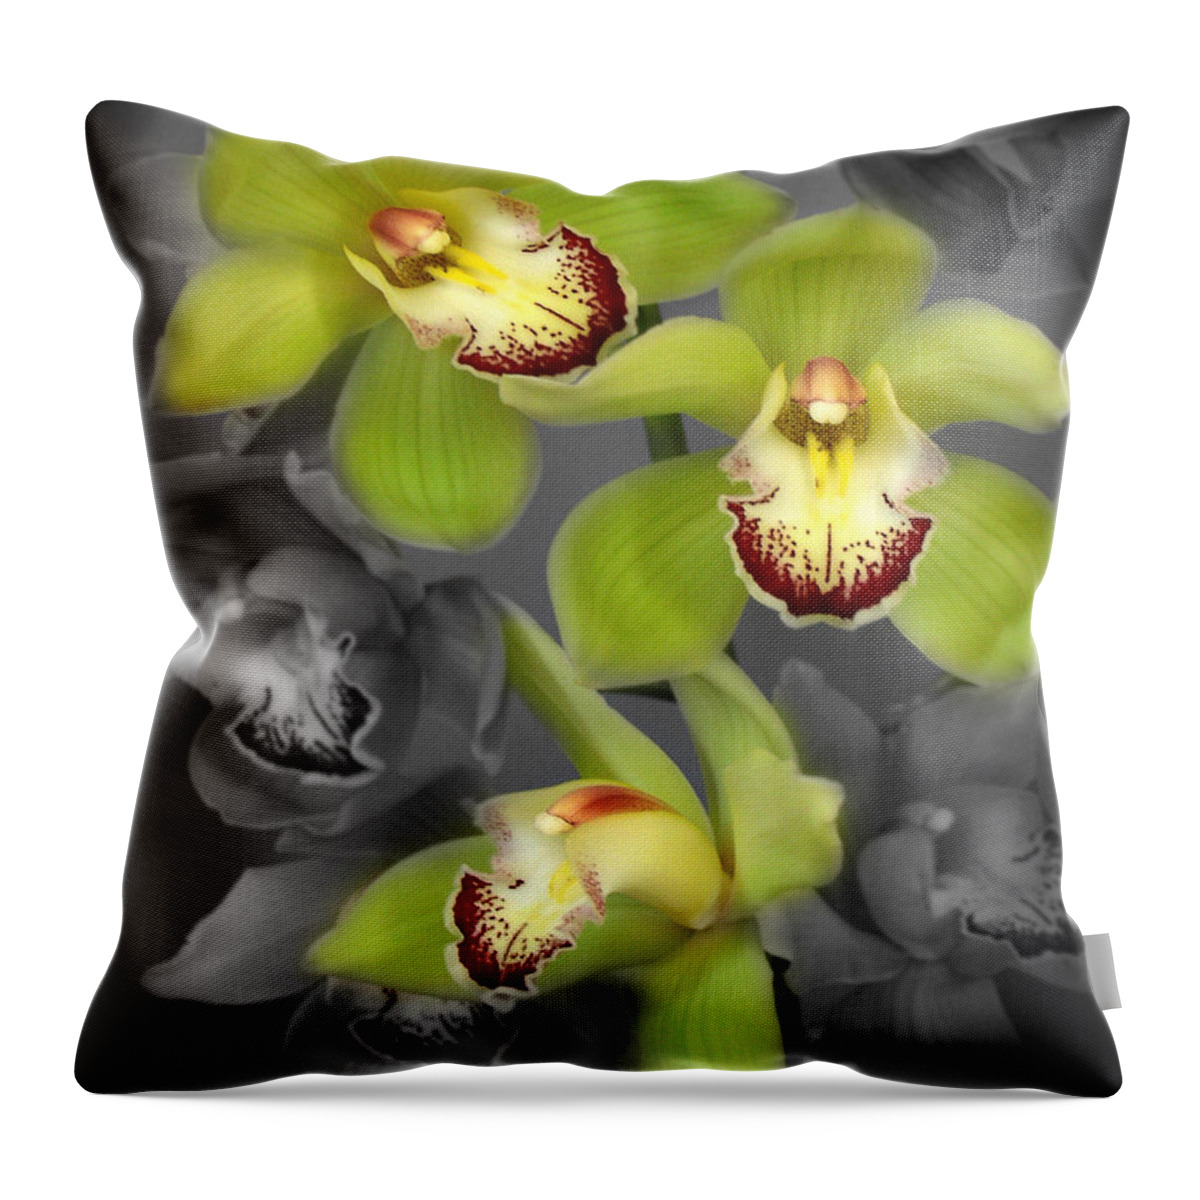 Flowers Throw Pillow featuring the photograph Cymbidium Orchid Green I Still Life Flower Art Poster by Lily Malor